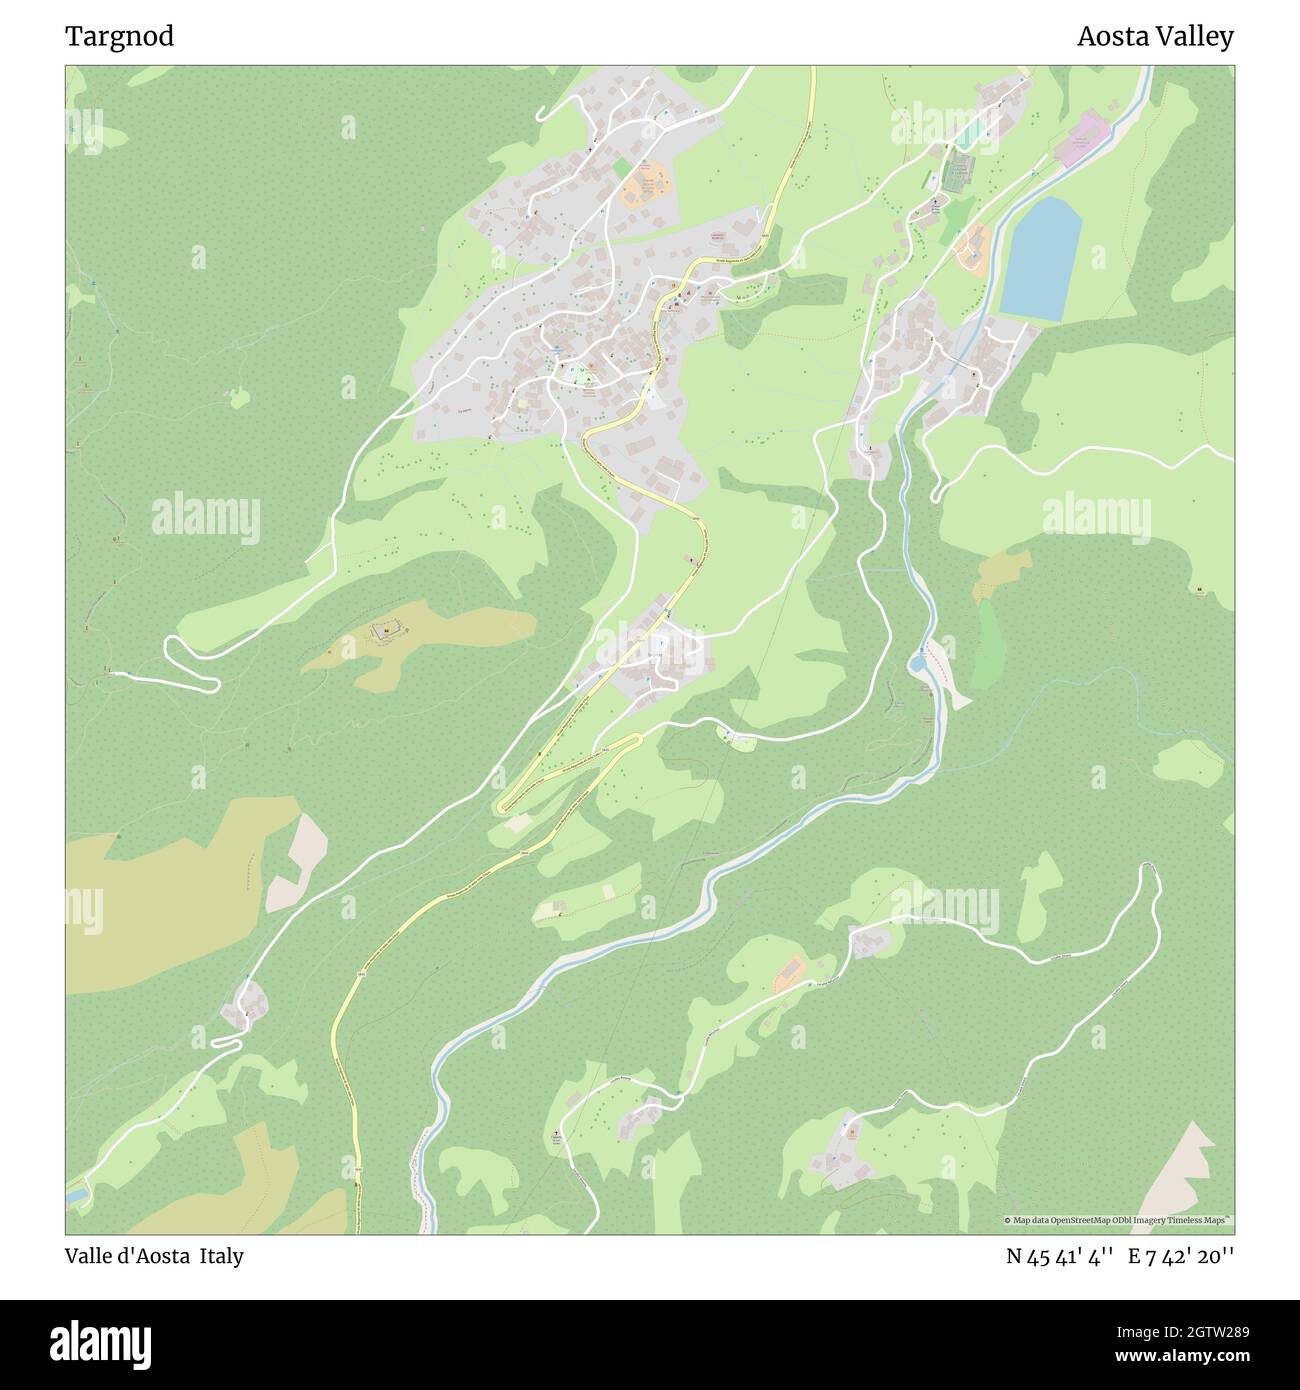 Targnod, Valle d'Aosta, Italy, Aosta Valley, N 45 41' 4'', E 7 42' 20'', map, Timeless Map published in 2021. Travelers, explorers and adventurers like Florence Nightingale, David Livingstone, Ernest Shackleton, Lewis and Clark and Sherlock Holmes relied on maps to plan travels to the world's most remote corners, Timeless Maps is mapping most locations on the globe, showing the achievement of great dreams Stock Photo